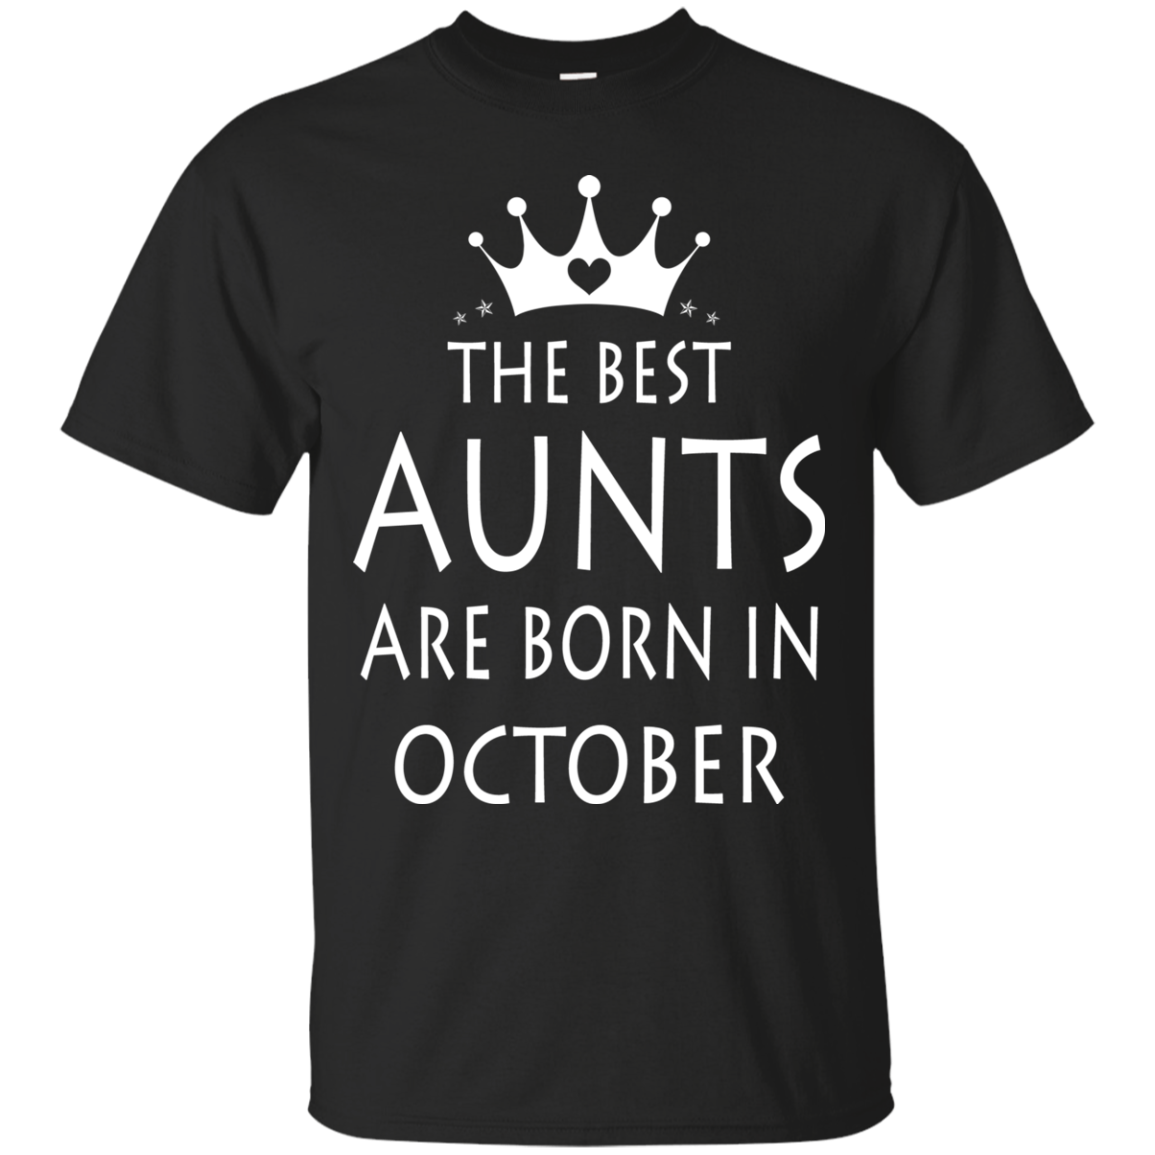 The best Aunts are born in October shirt, tank, sweater